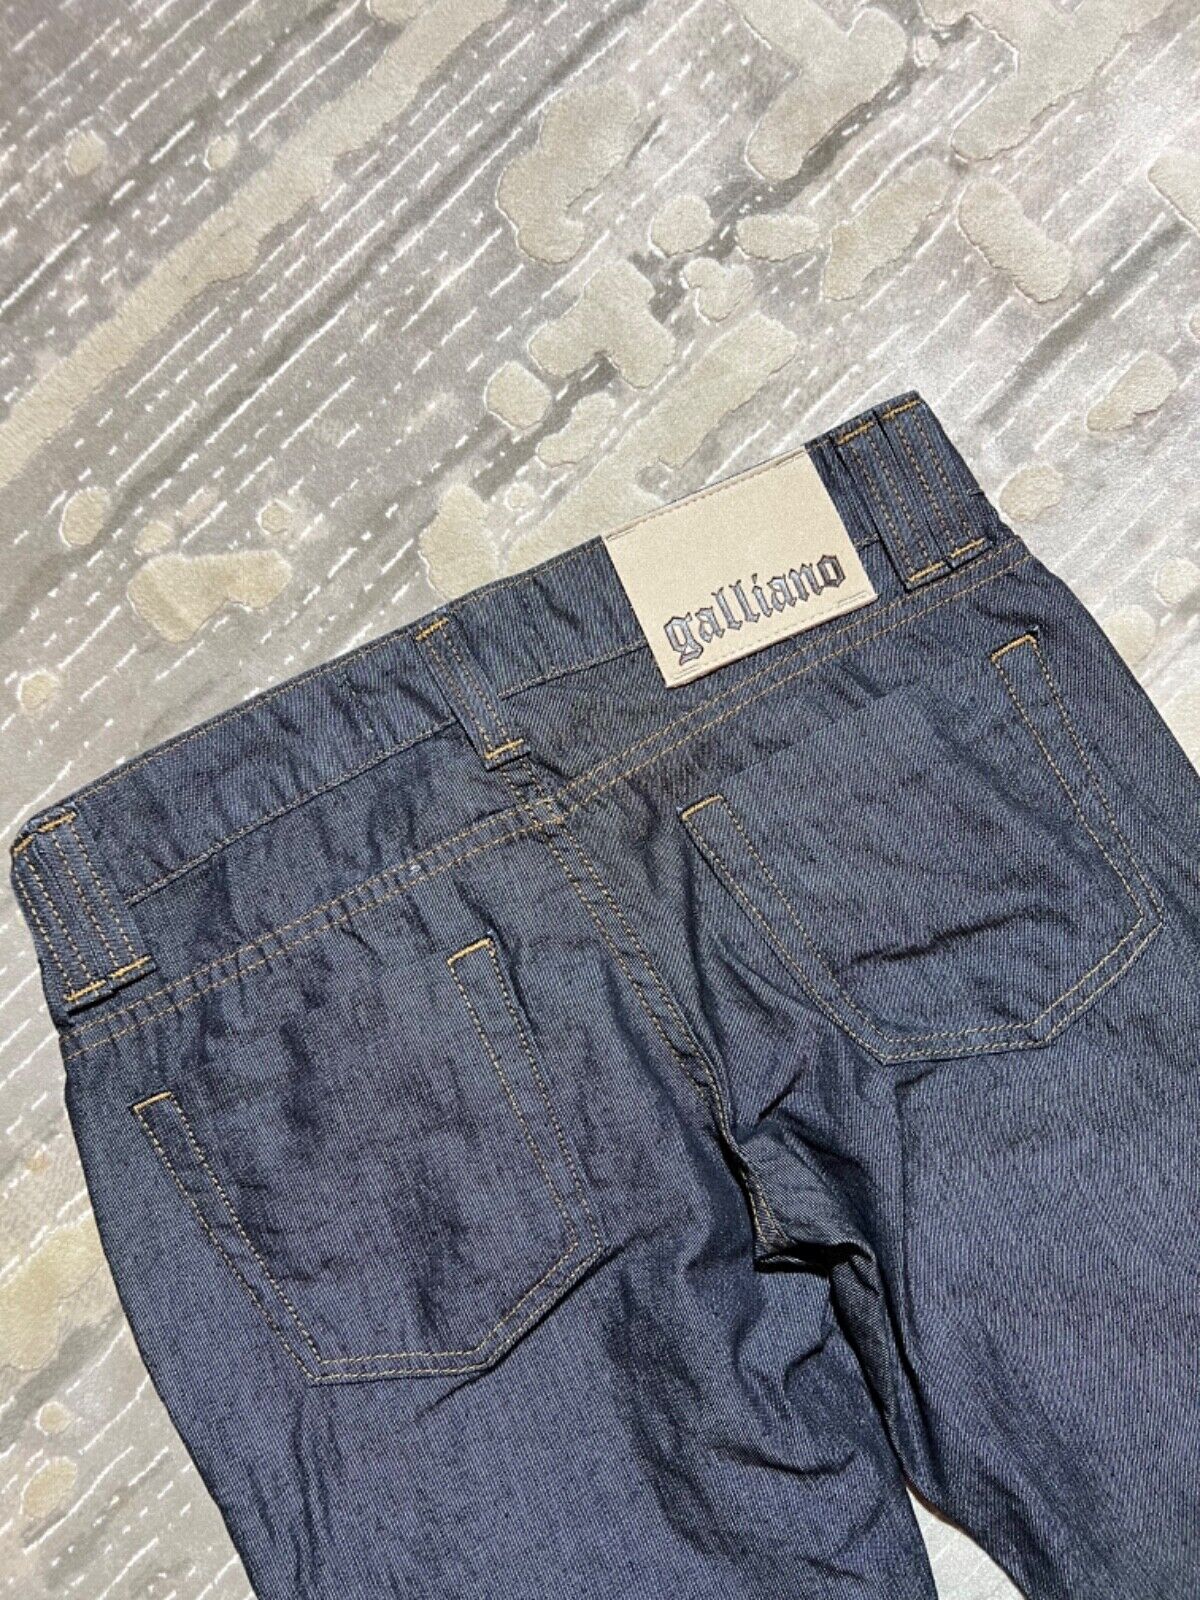 Vintage casual pants galliano italy rare women’s … - image 8